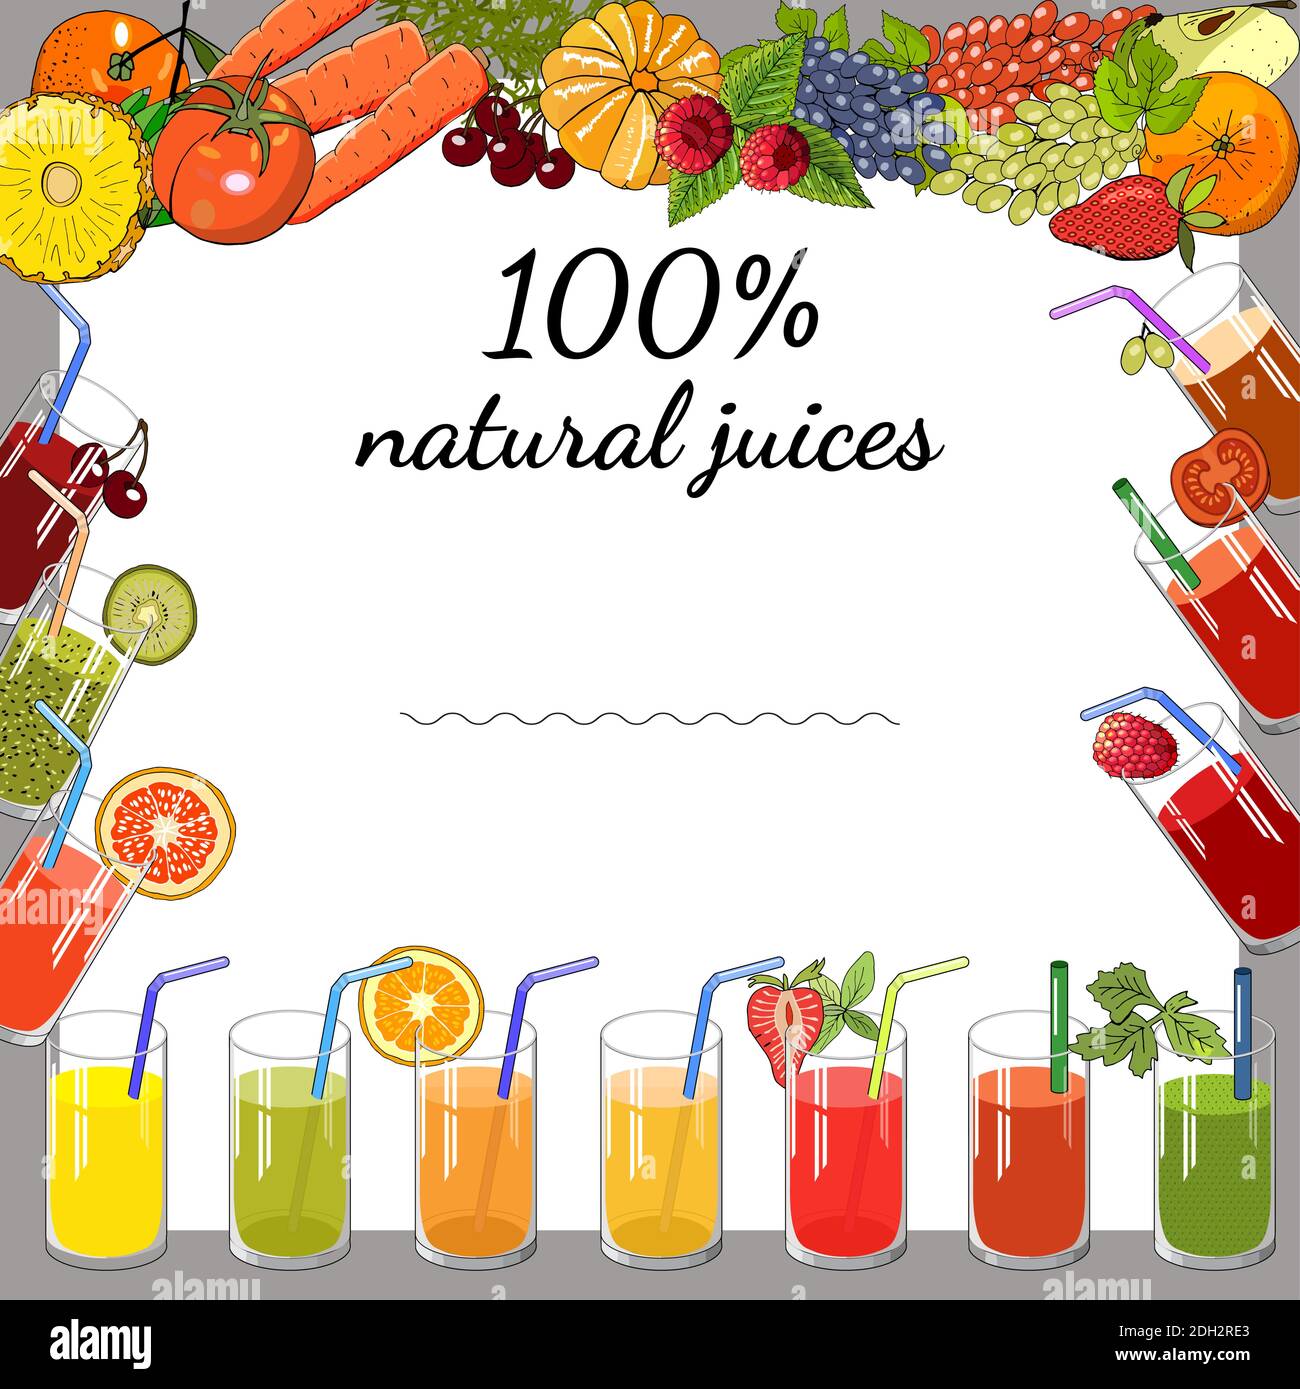 Natural juice template. Vector hand drawn illustration for your design, announcements, cards, posters, restaurant menu. Stock Vector